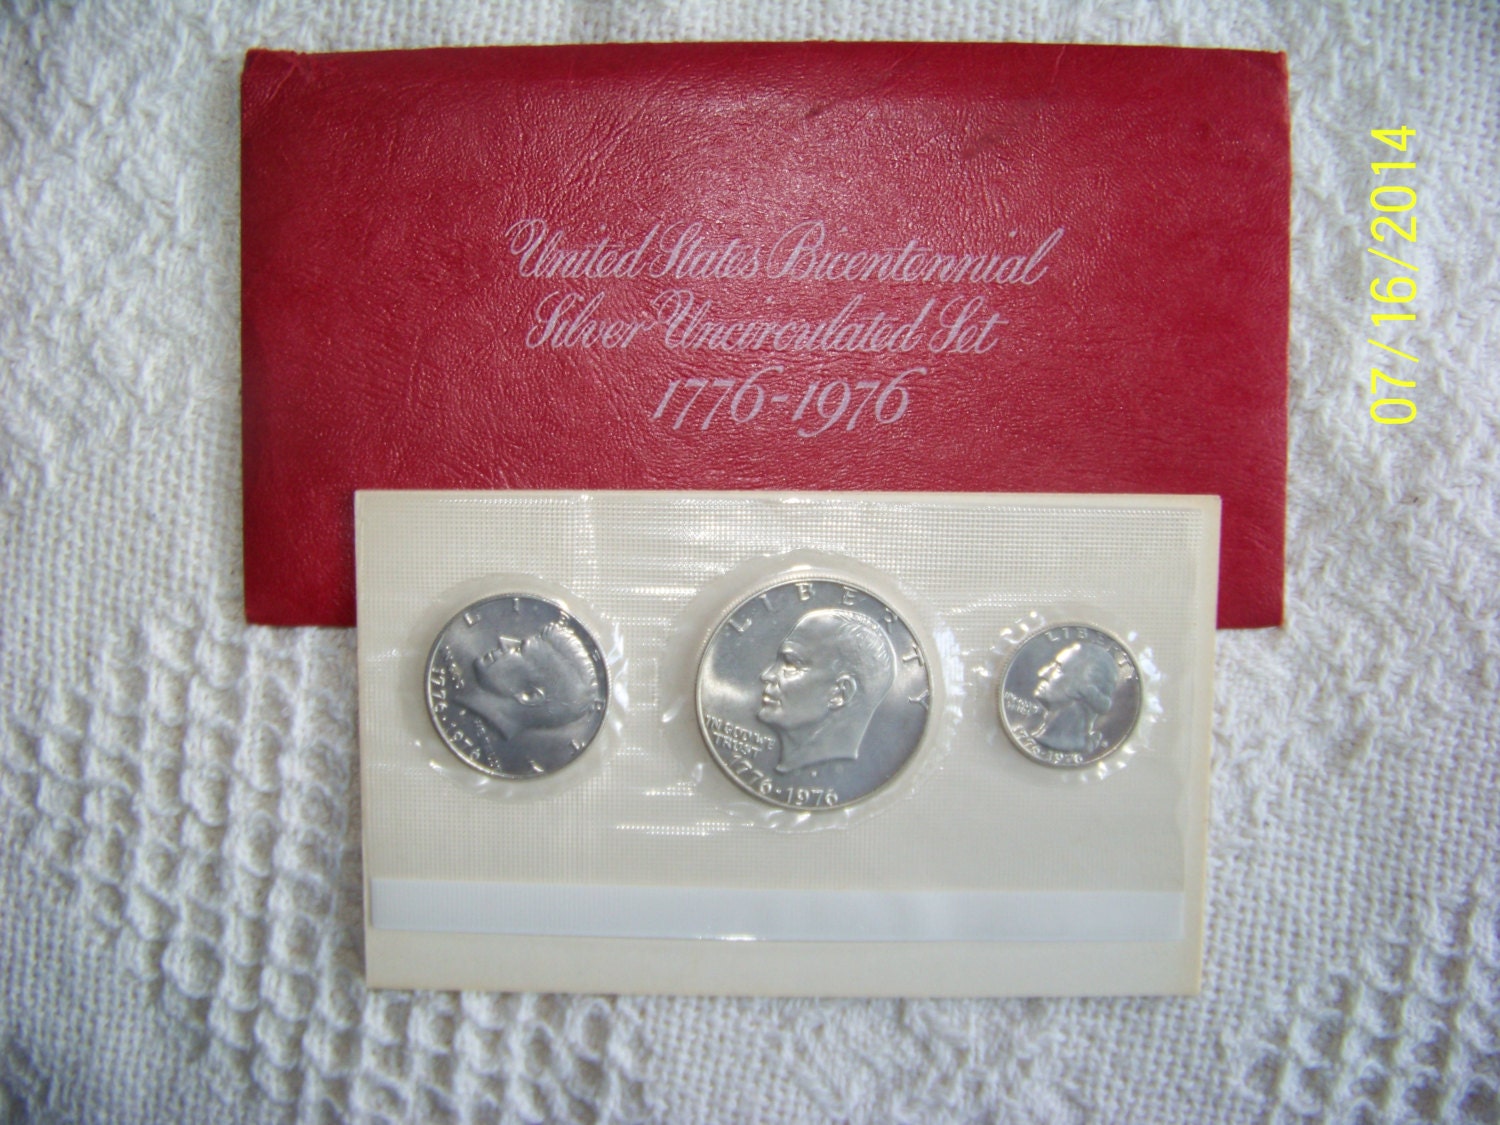 United States Bicentennial Silver Uncirculated Set 1776 To 1976